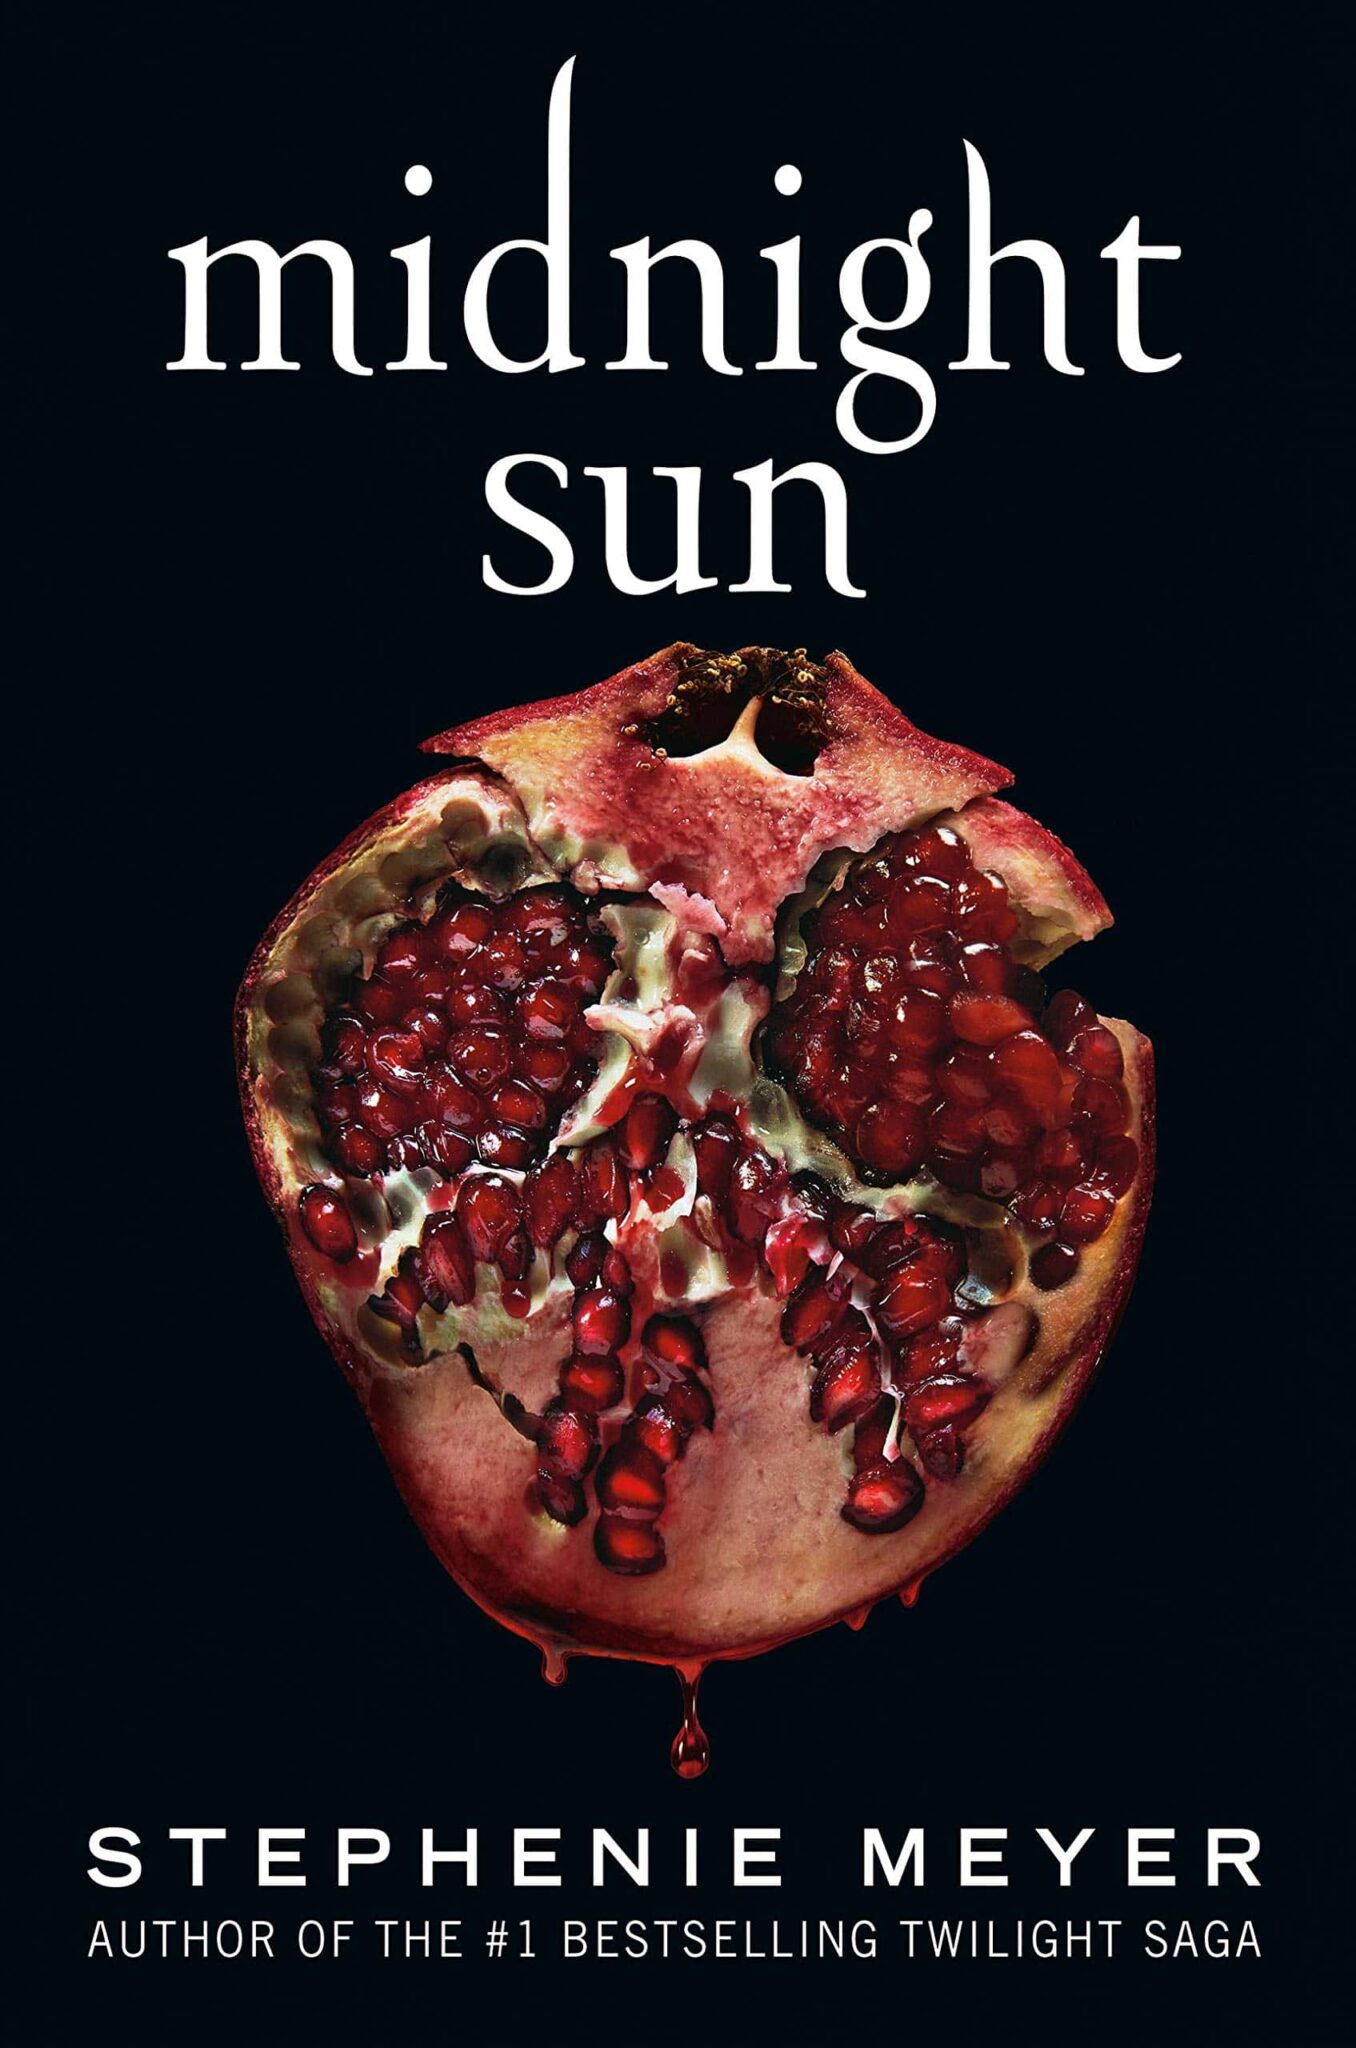 midnight sun book cover of a red pomegranate on a black background